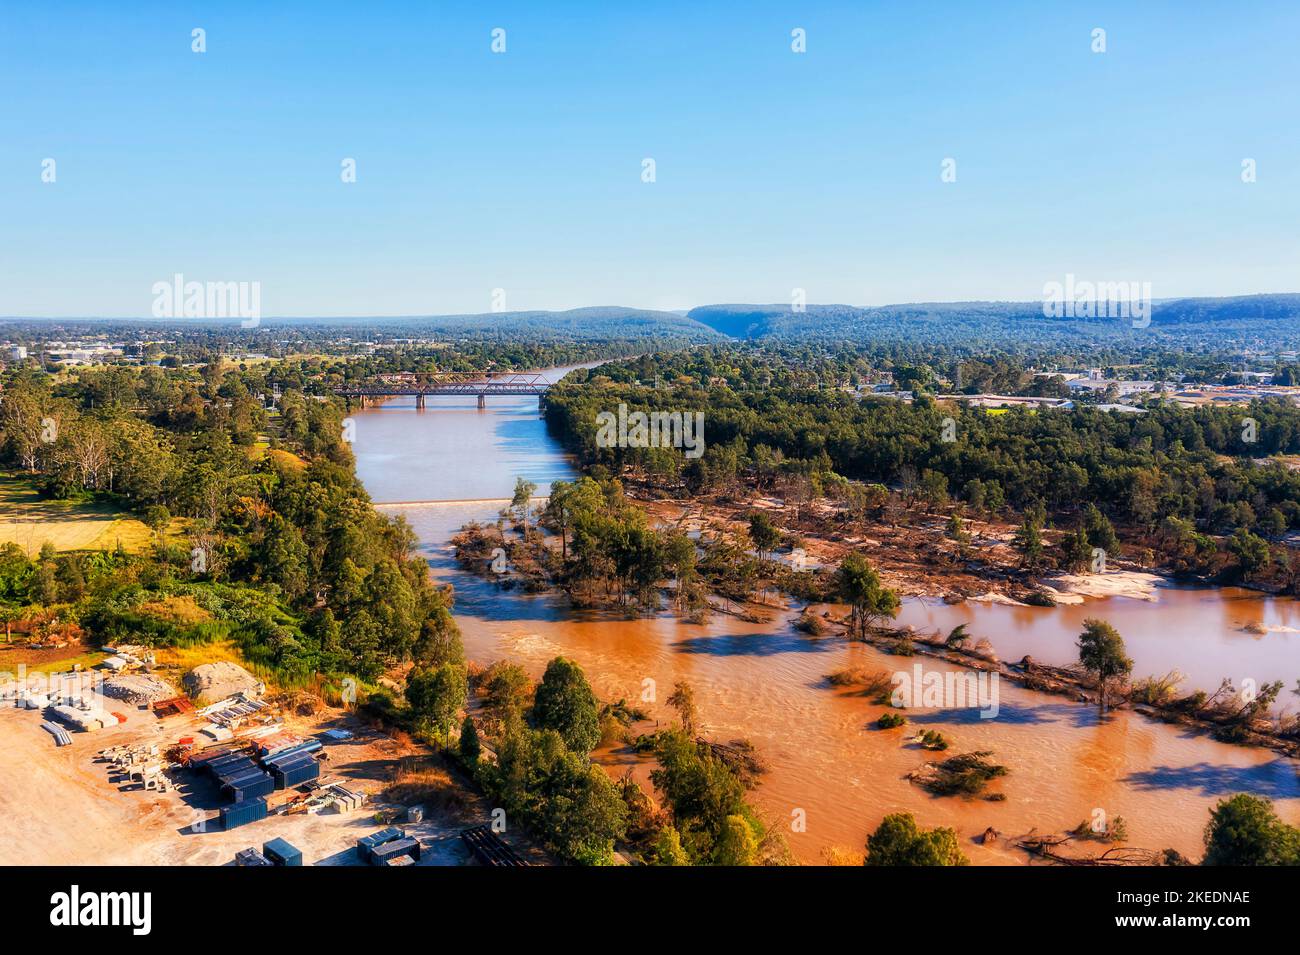 Nepean river in Western Sydney near Blue Mountains - Victoria bridge and Yandhai Nepean crossing in aerial landscape. Stock Photo